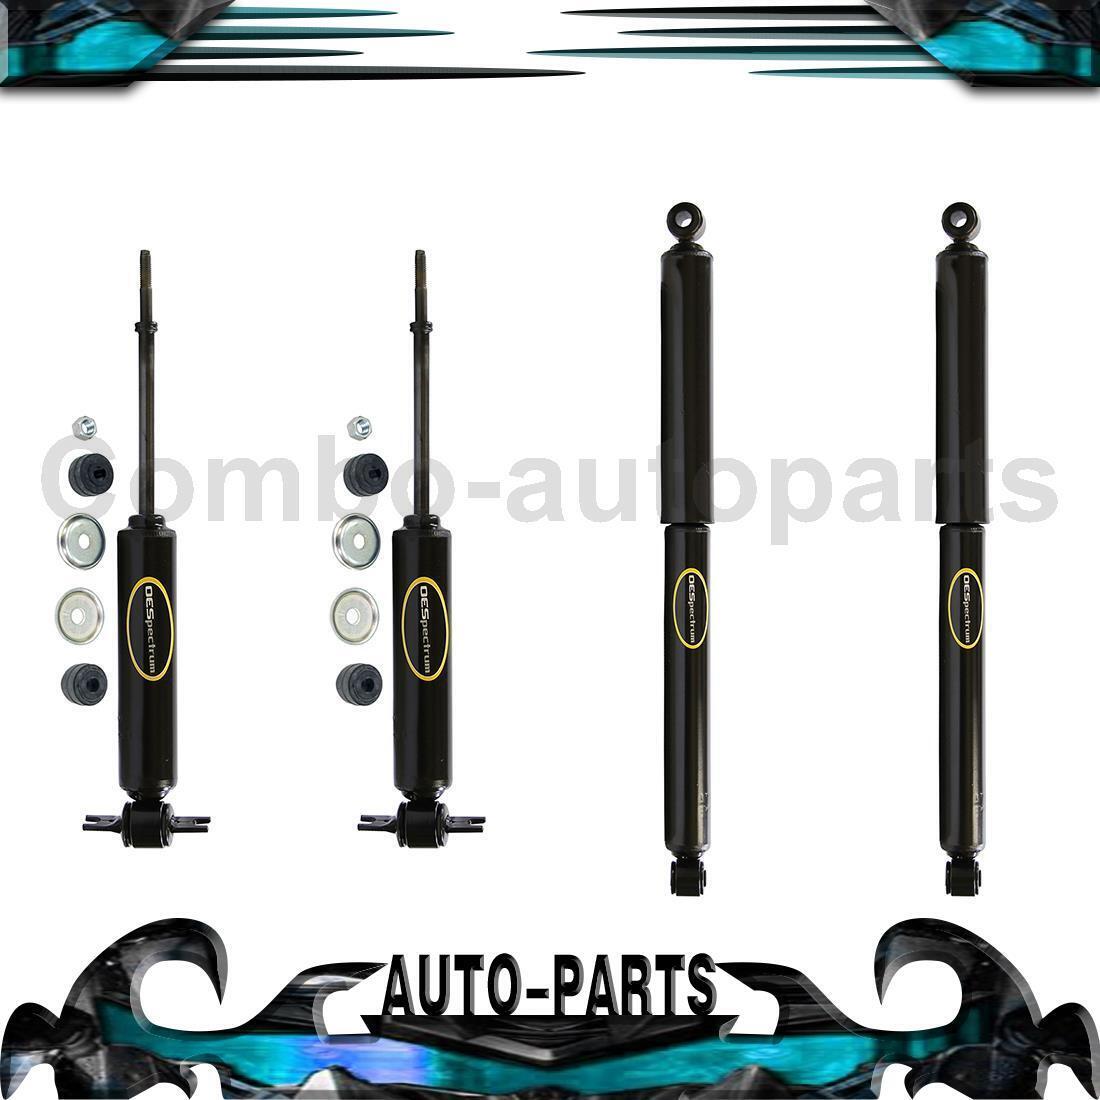 4x Monroe Shocks Absorbers Front Rear For 1964 Buick LeSabre 7.0L